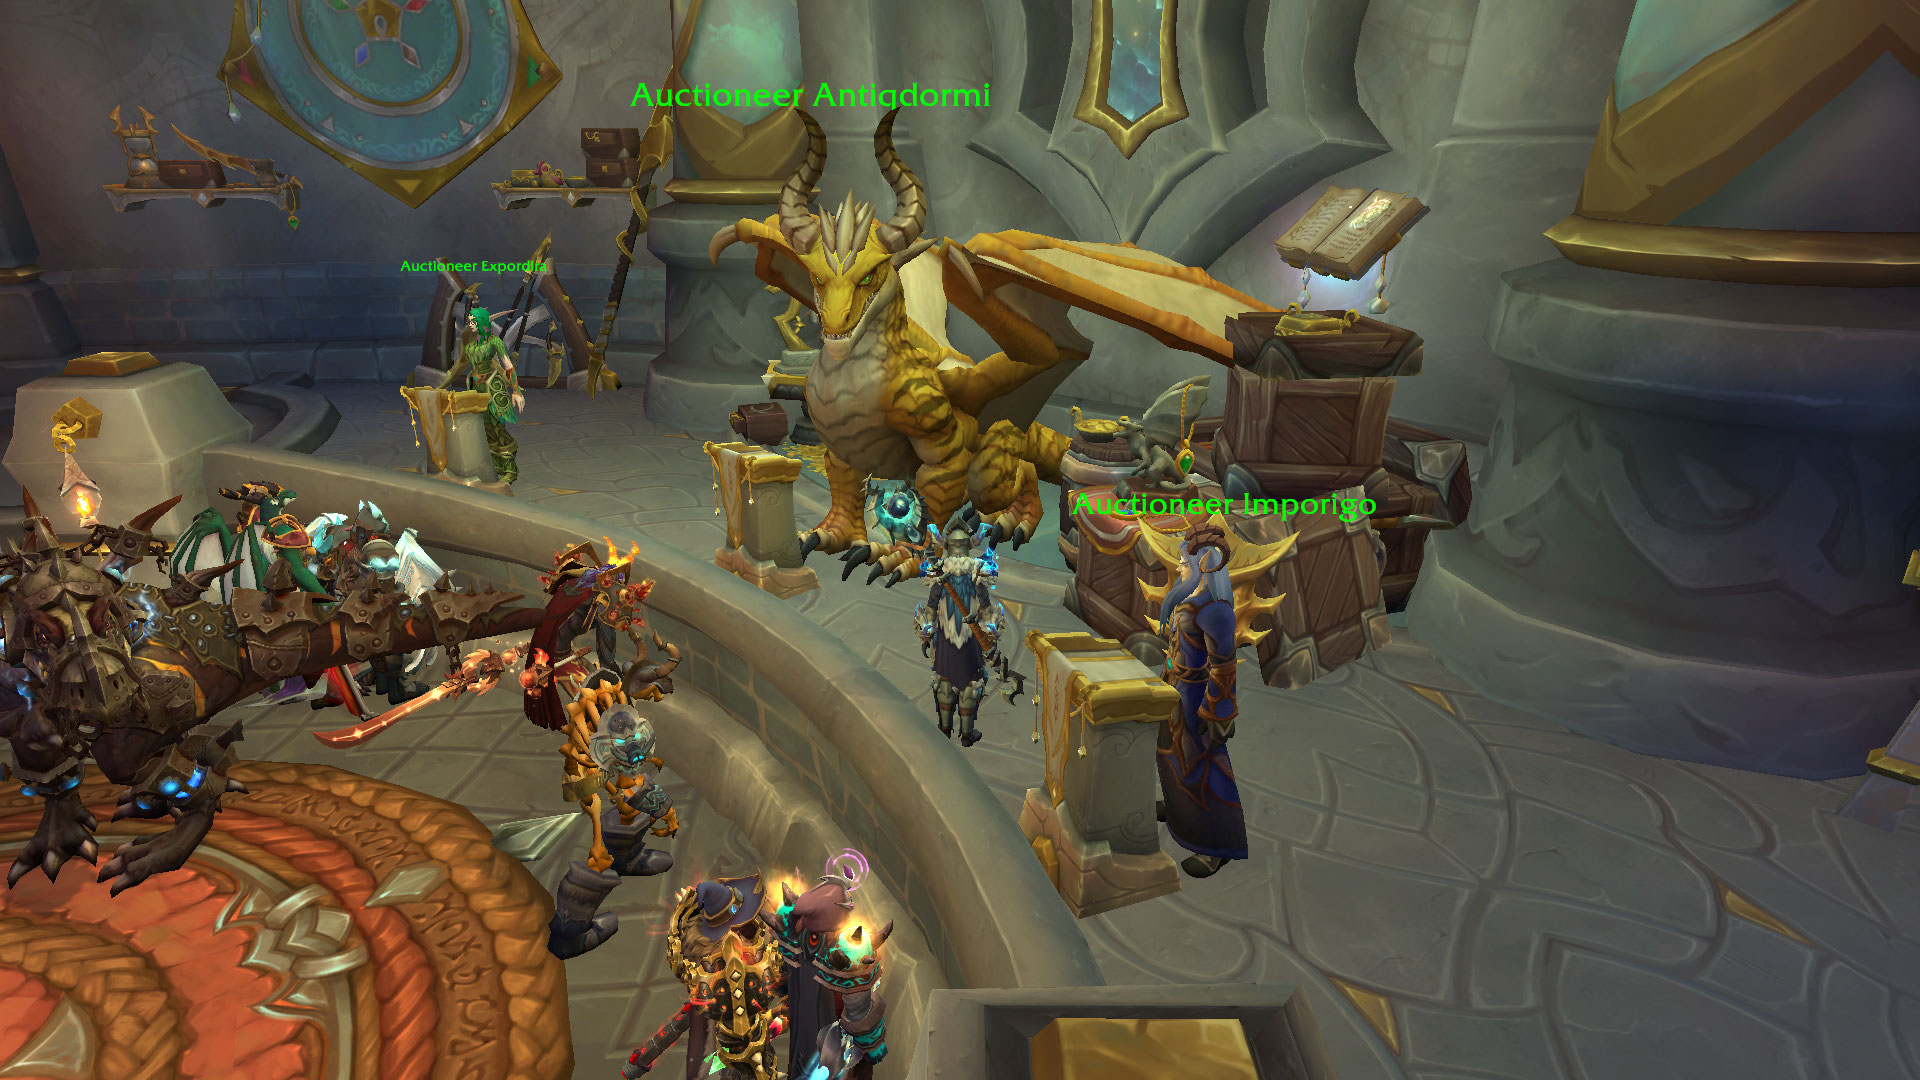 WoW Auction house inside